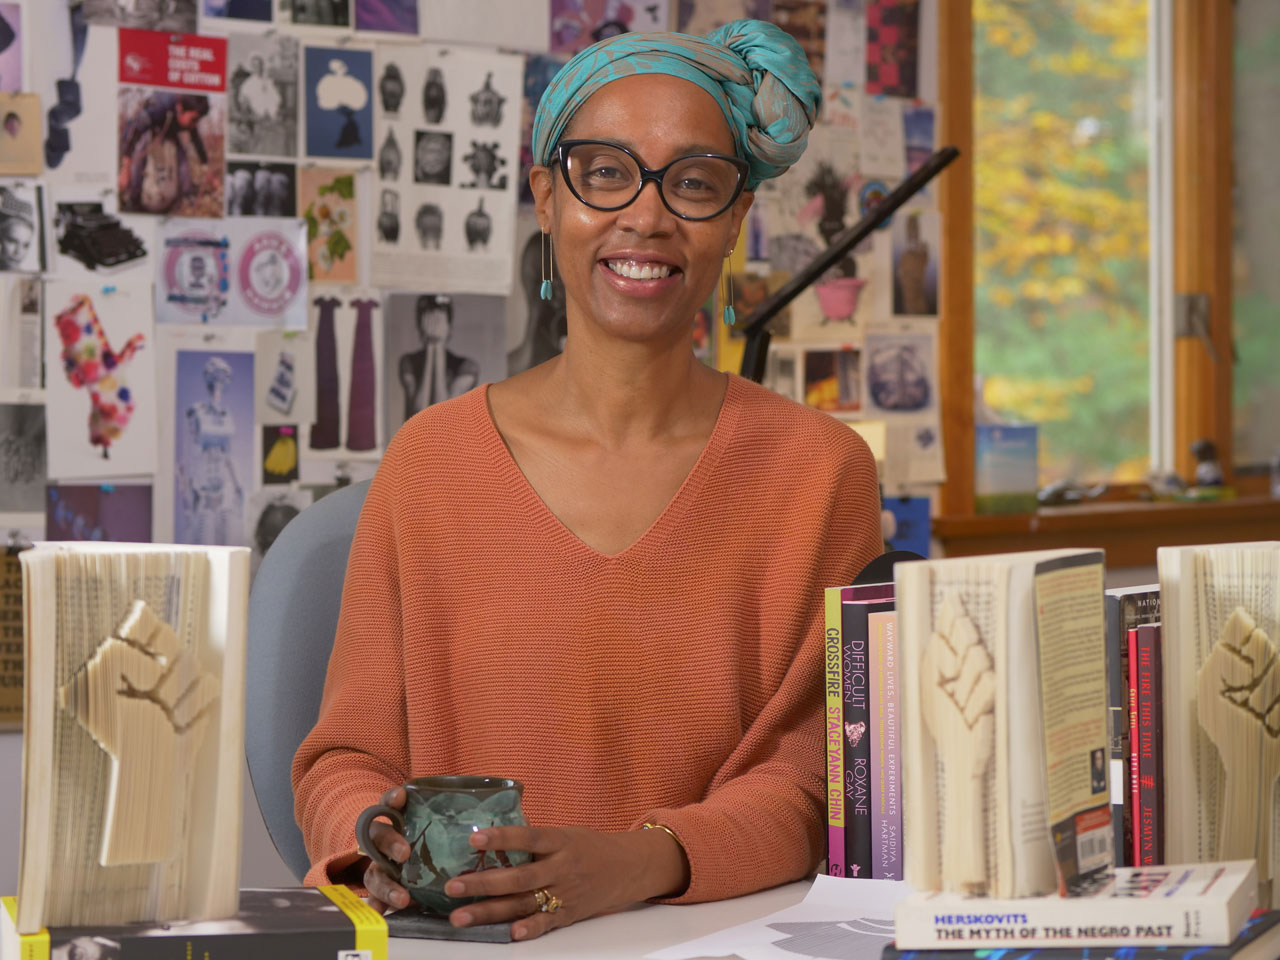 Sonya Clark sits in her art studio with sculpted books next to her